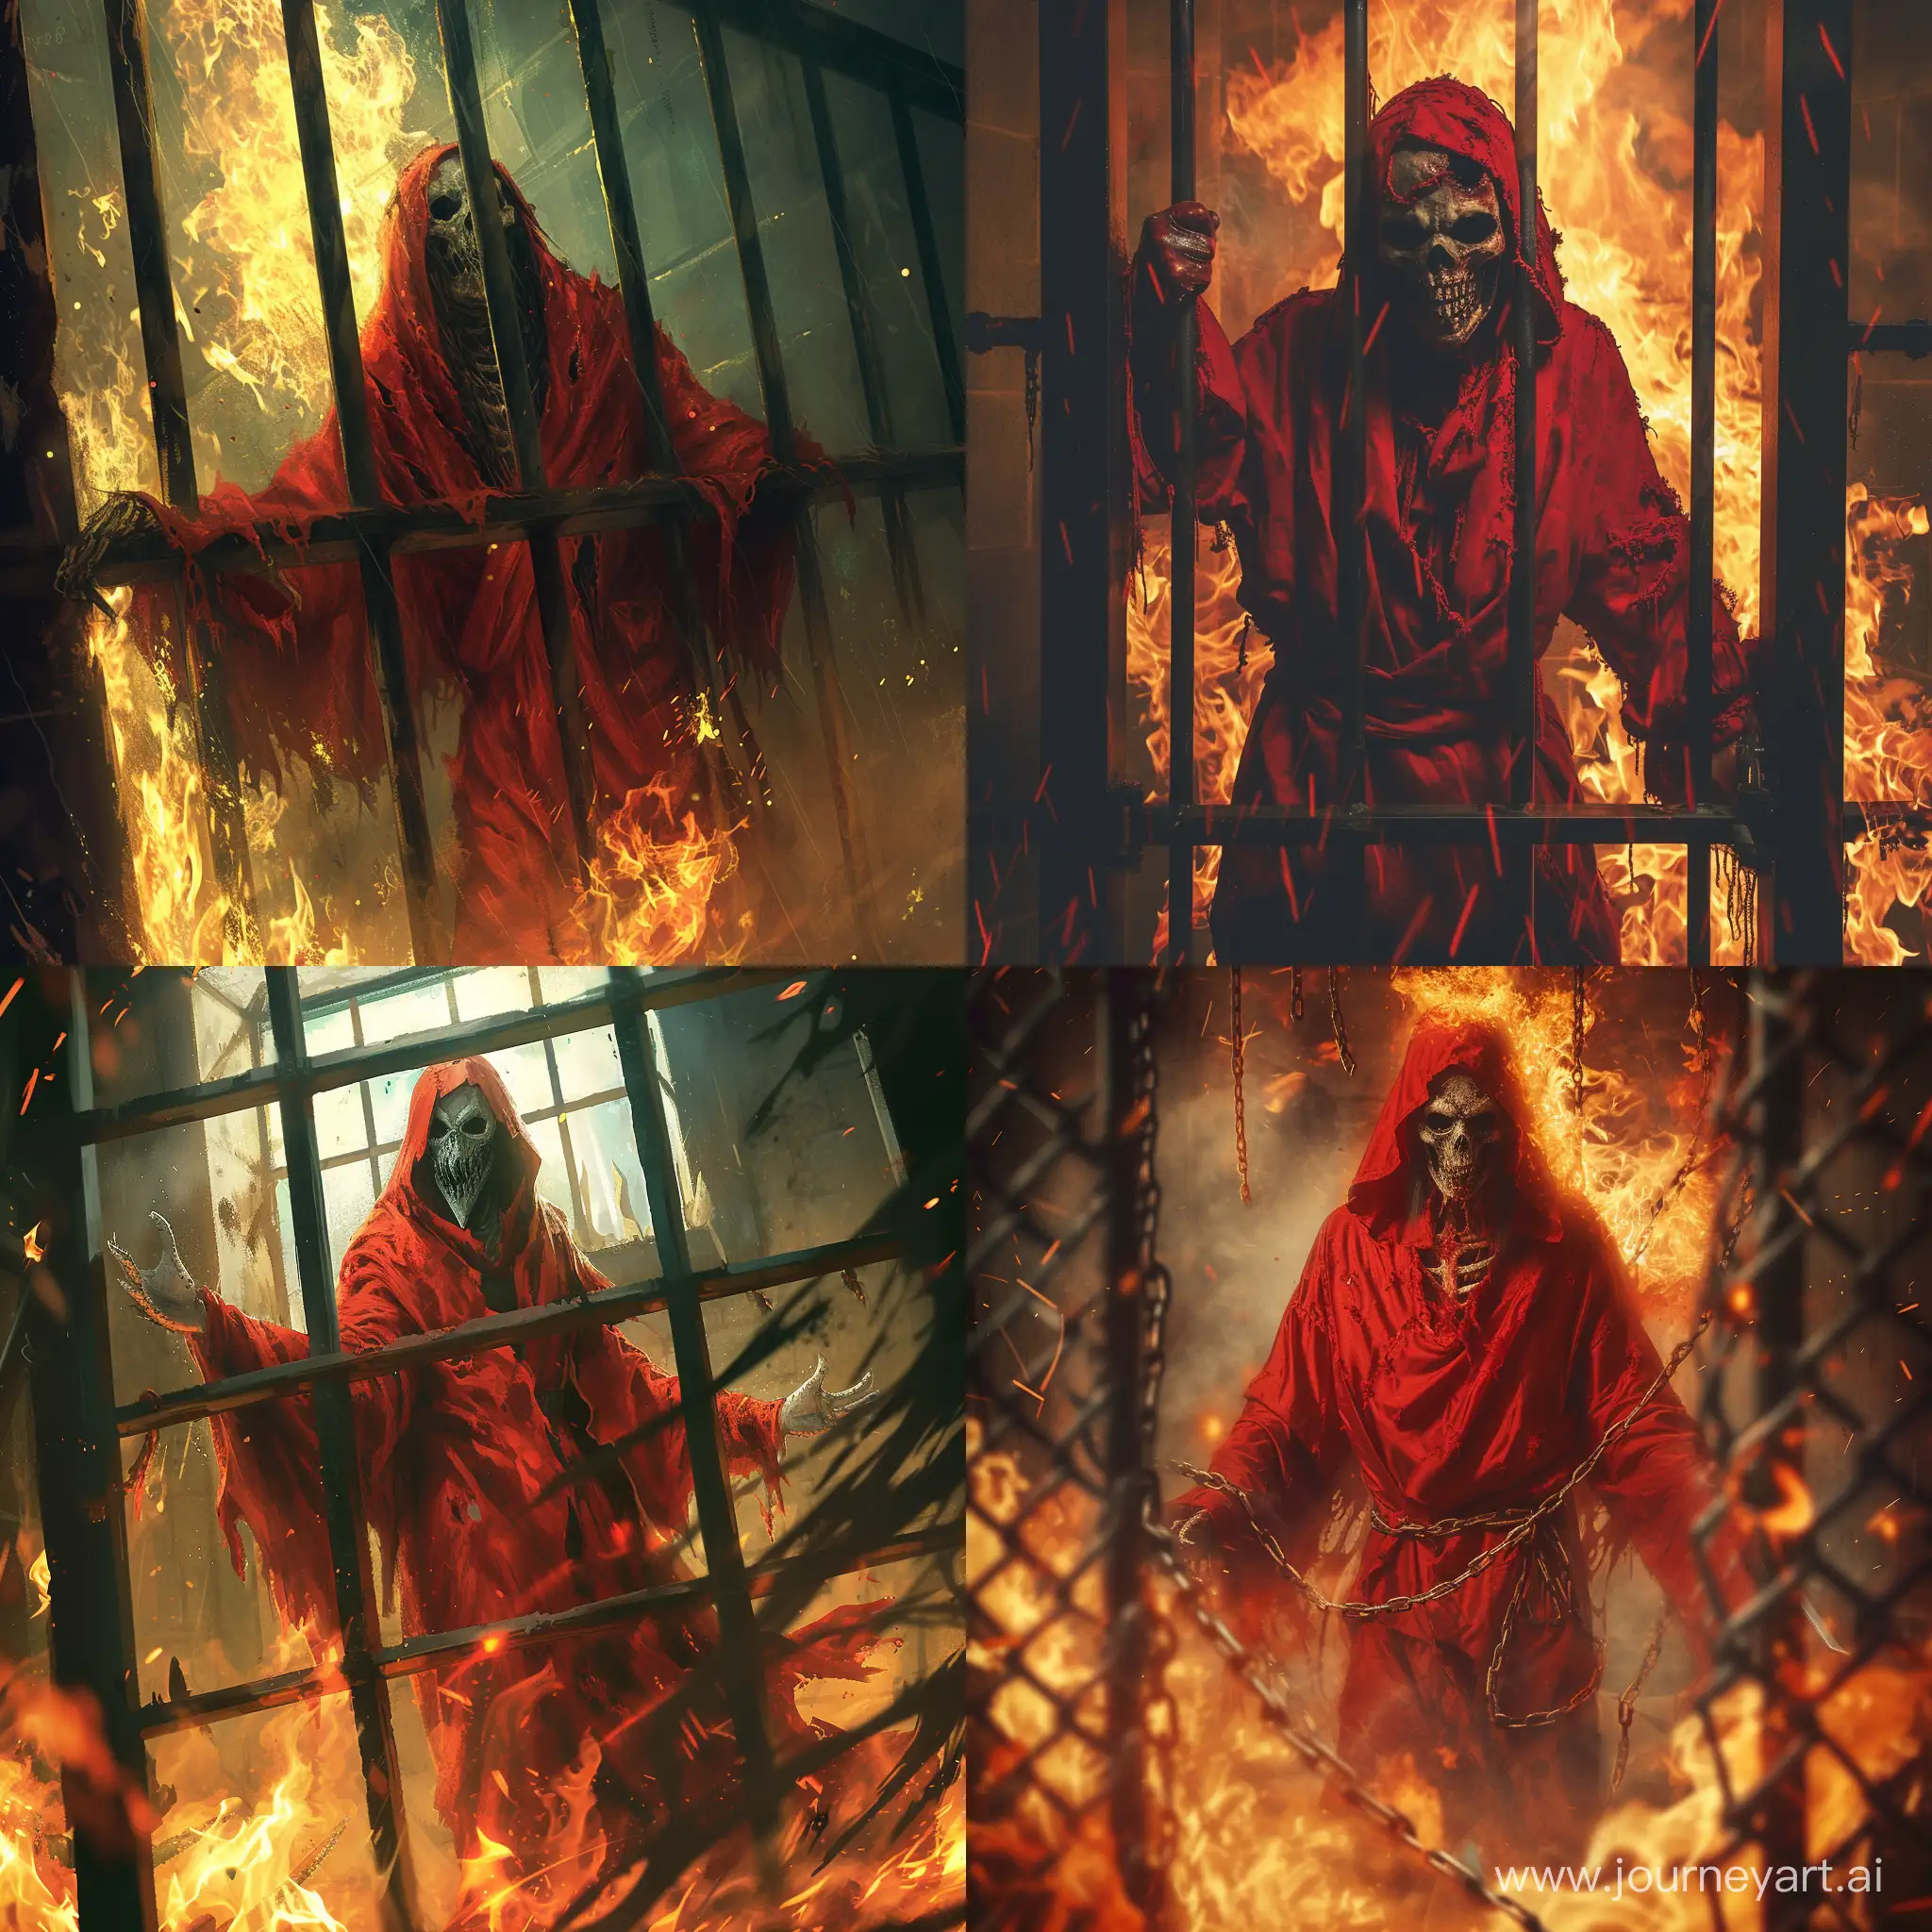 Grim reaper zombie with read robe locked up in a cell that’s on fire with a badass plague mask